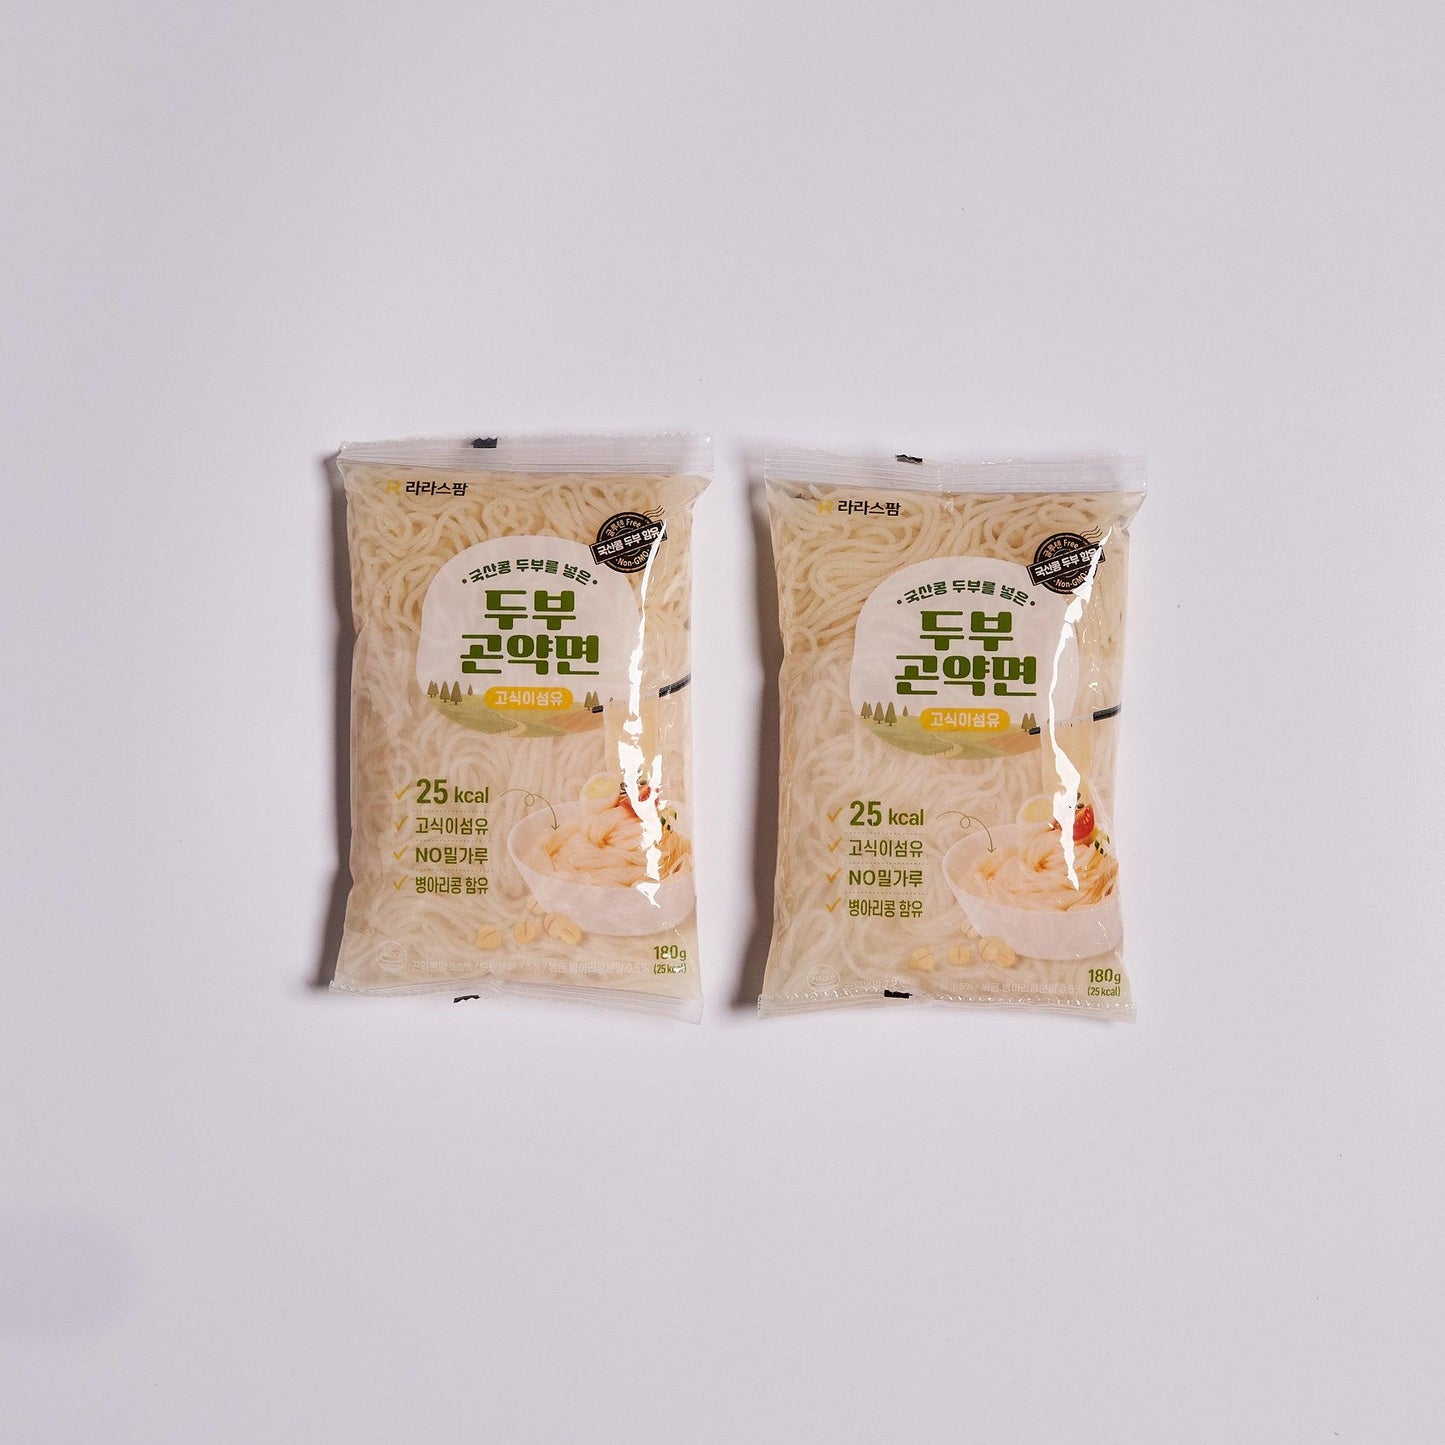 Tofu Gonyak Noodle (Pack of 2) Sell by 5/16/23 - Kim'C Market